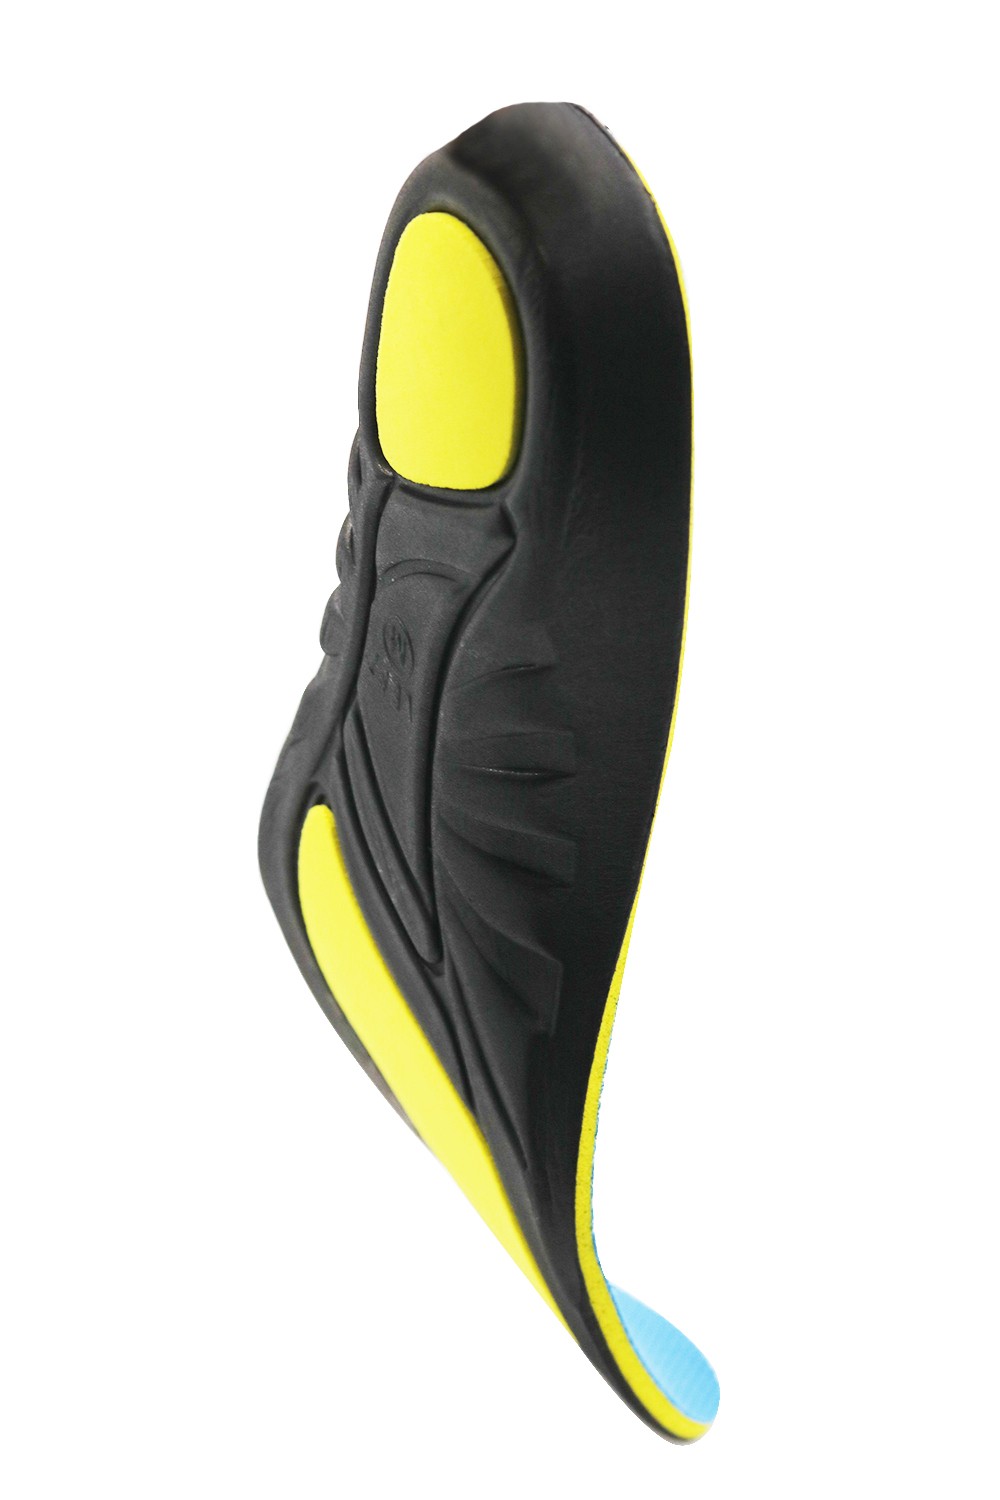 S-King Wholesale arch support orthotics for stand-5